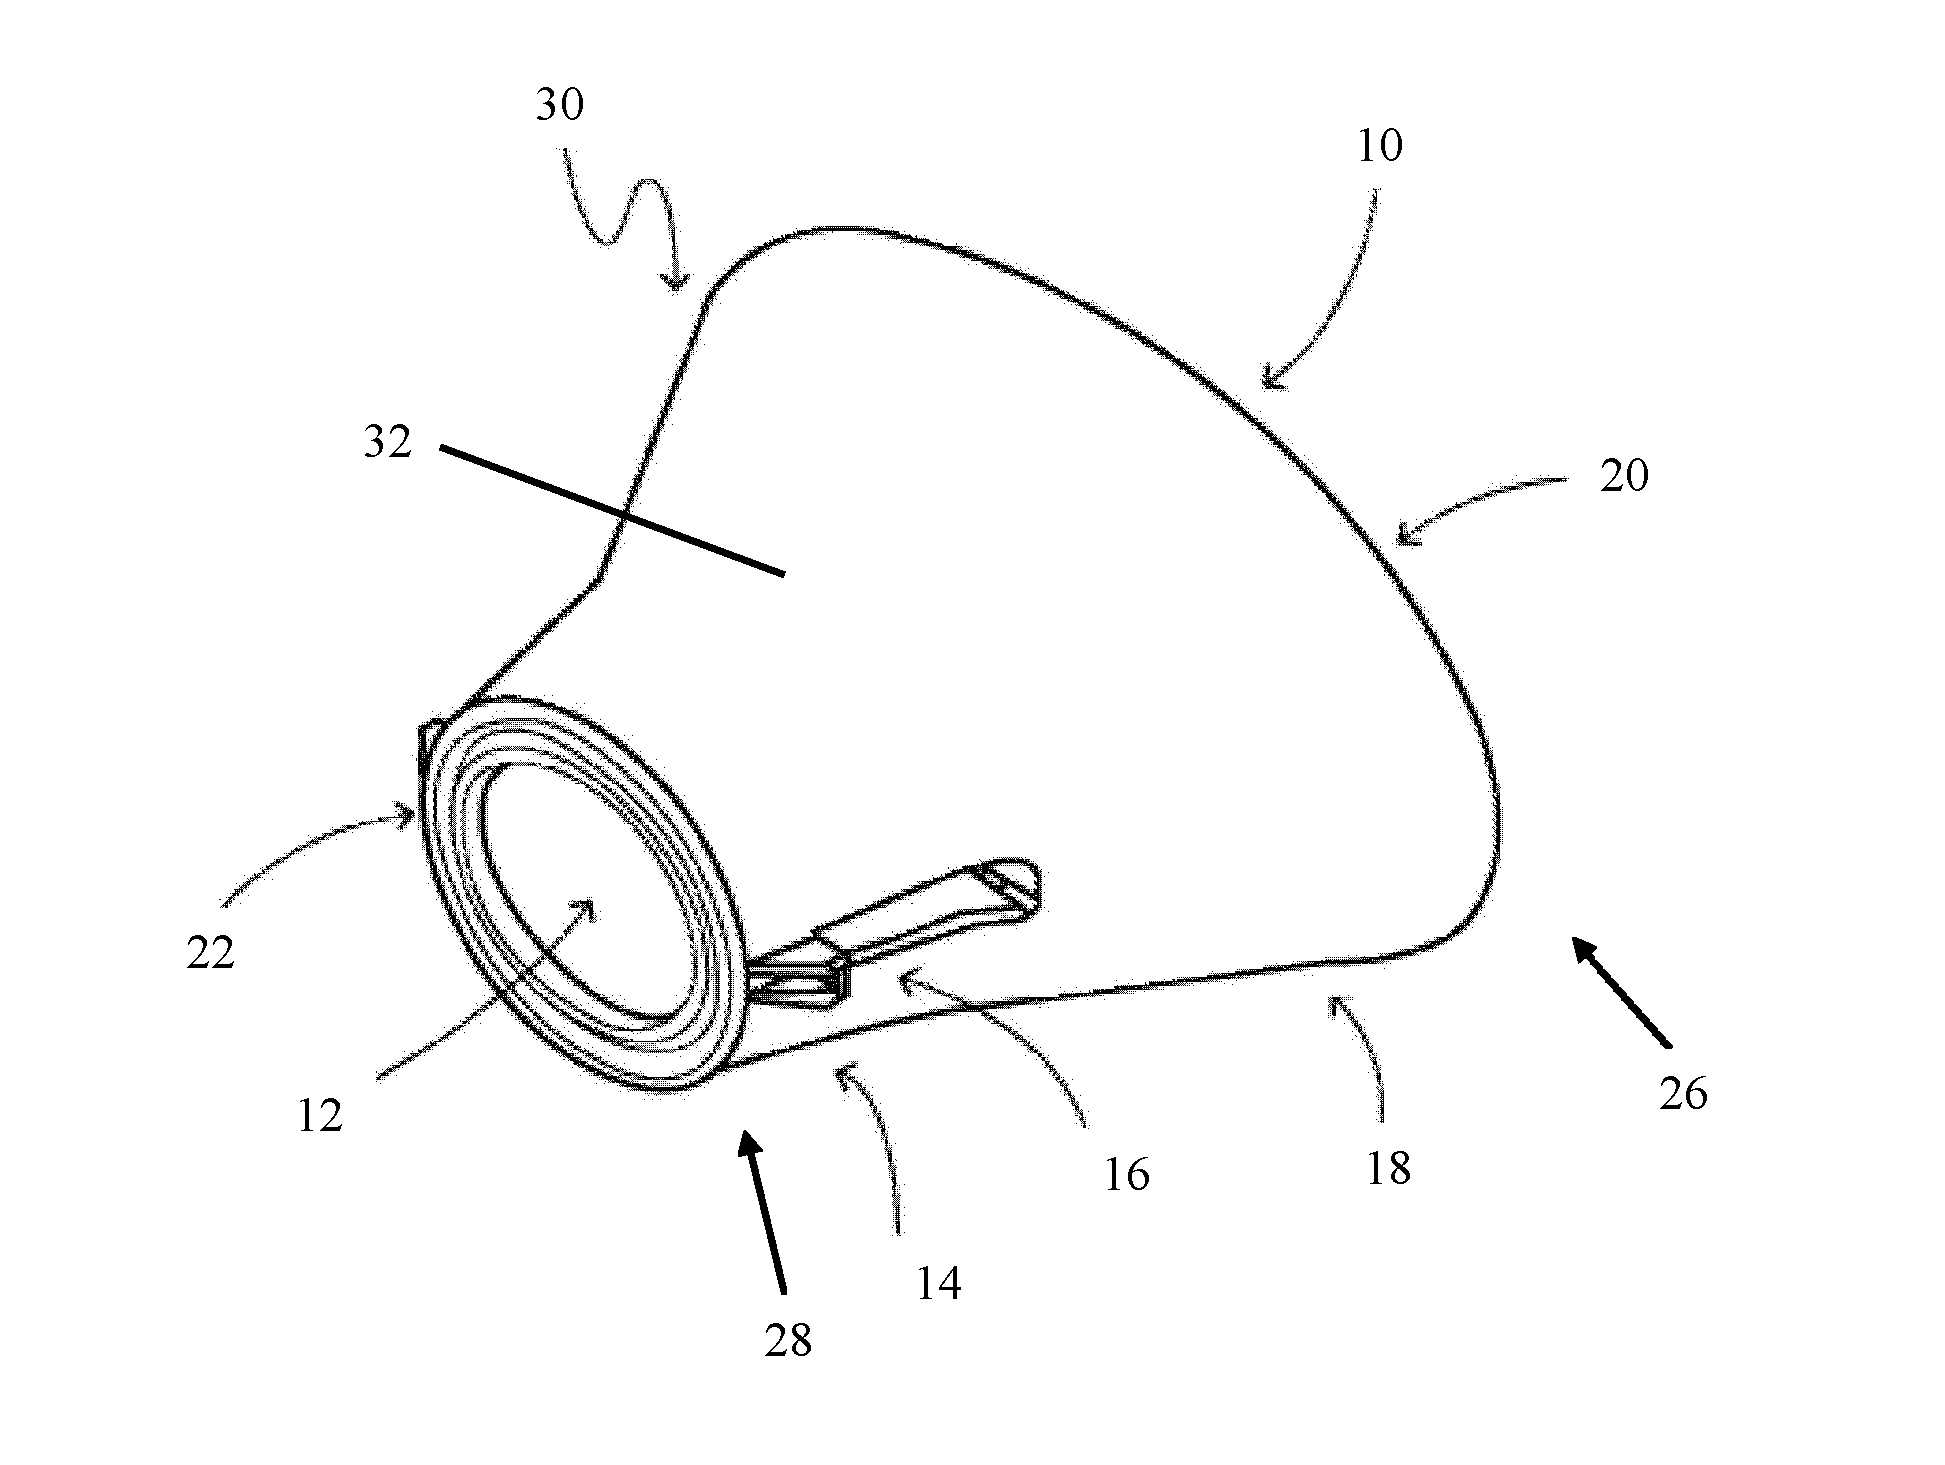 Applicator device and method of use for exsanguination tourniquet